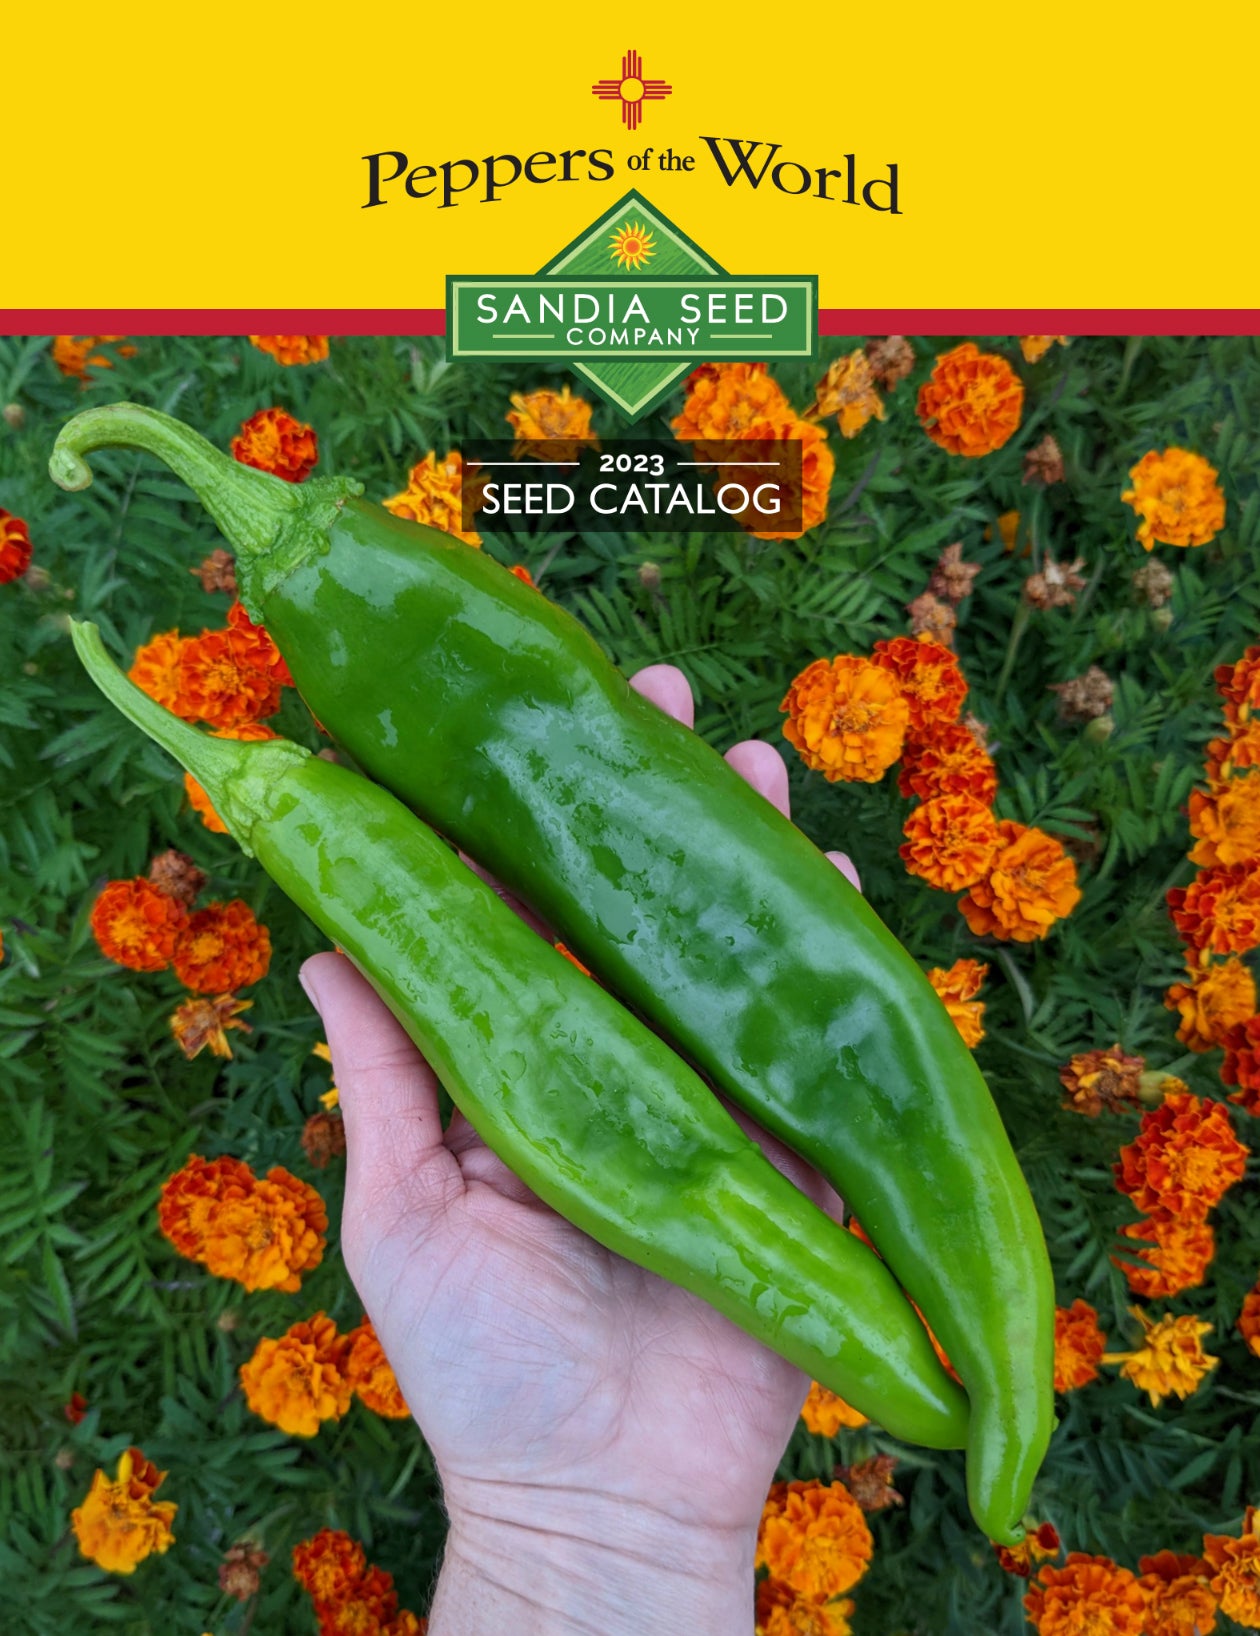 2023 Seed Catalog from Sandia Seed